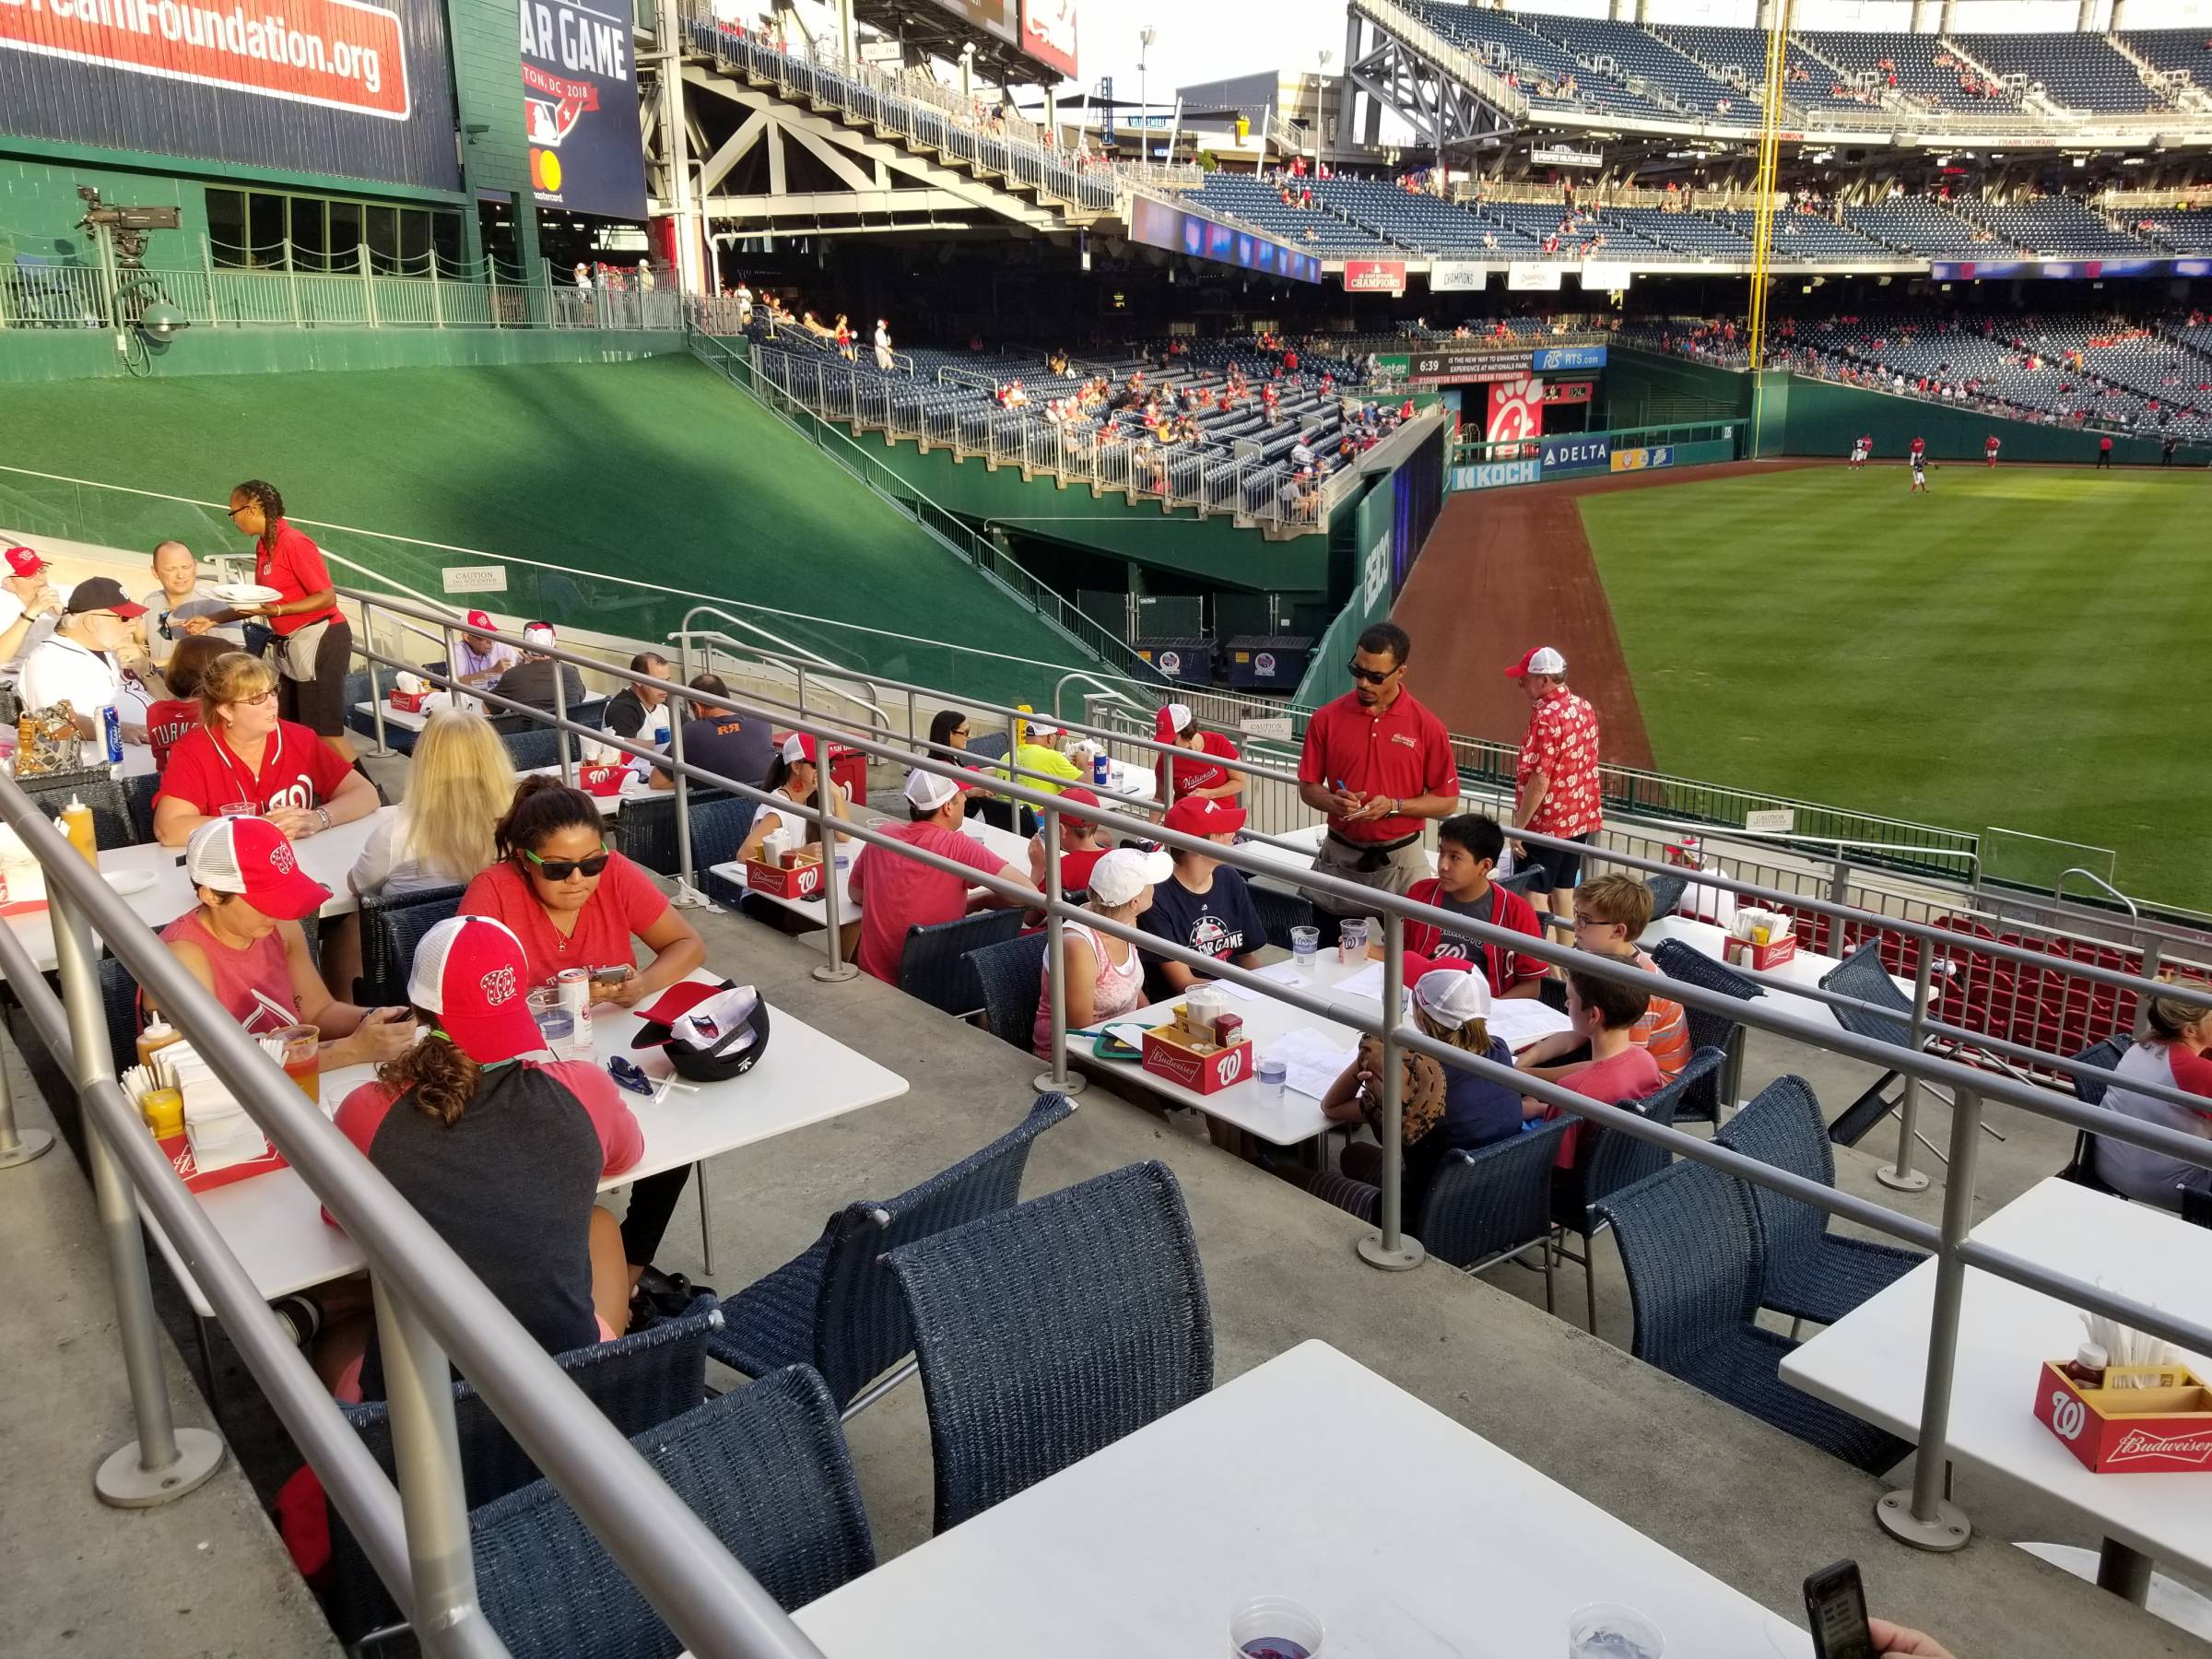 Brewhouse Porch at Nationals Park